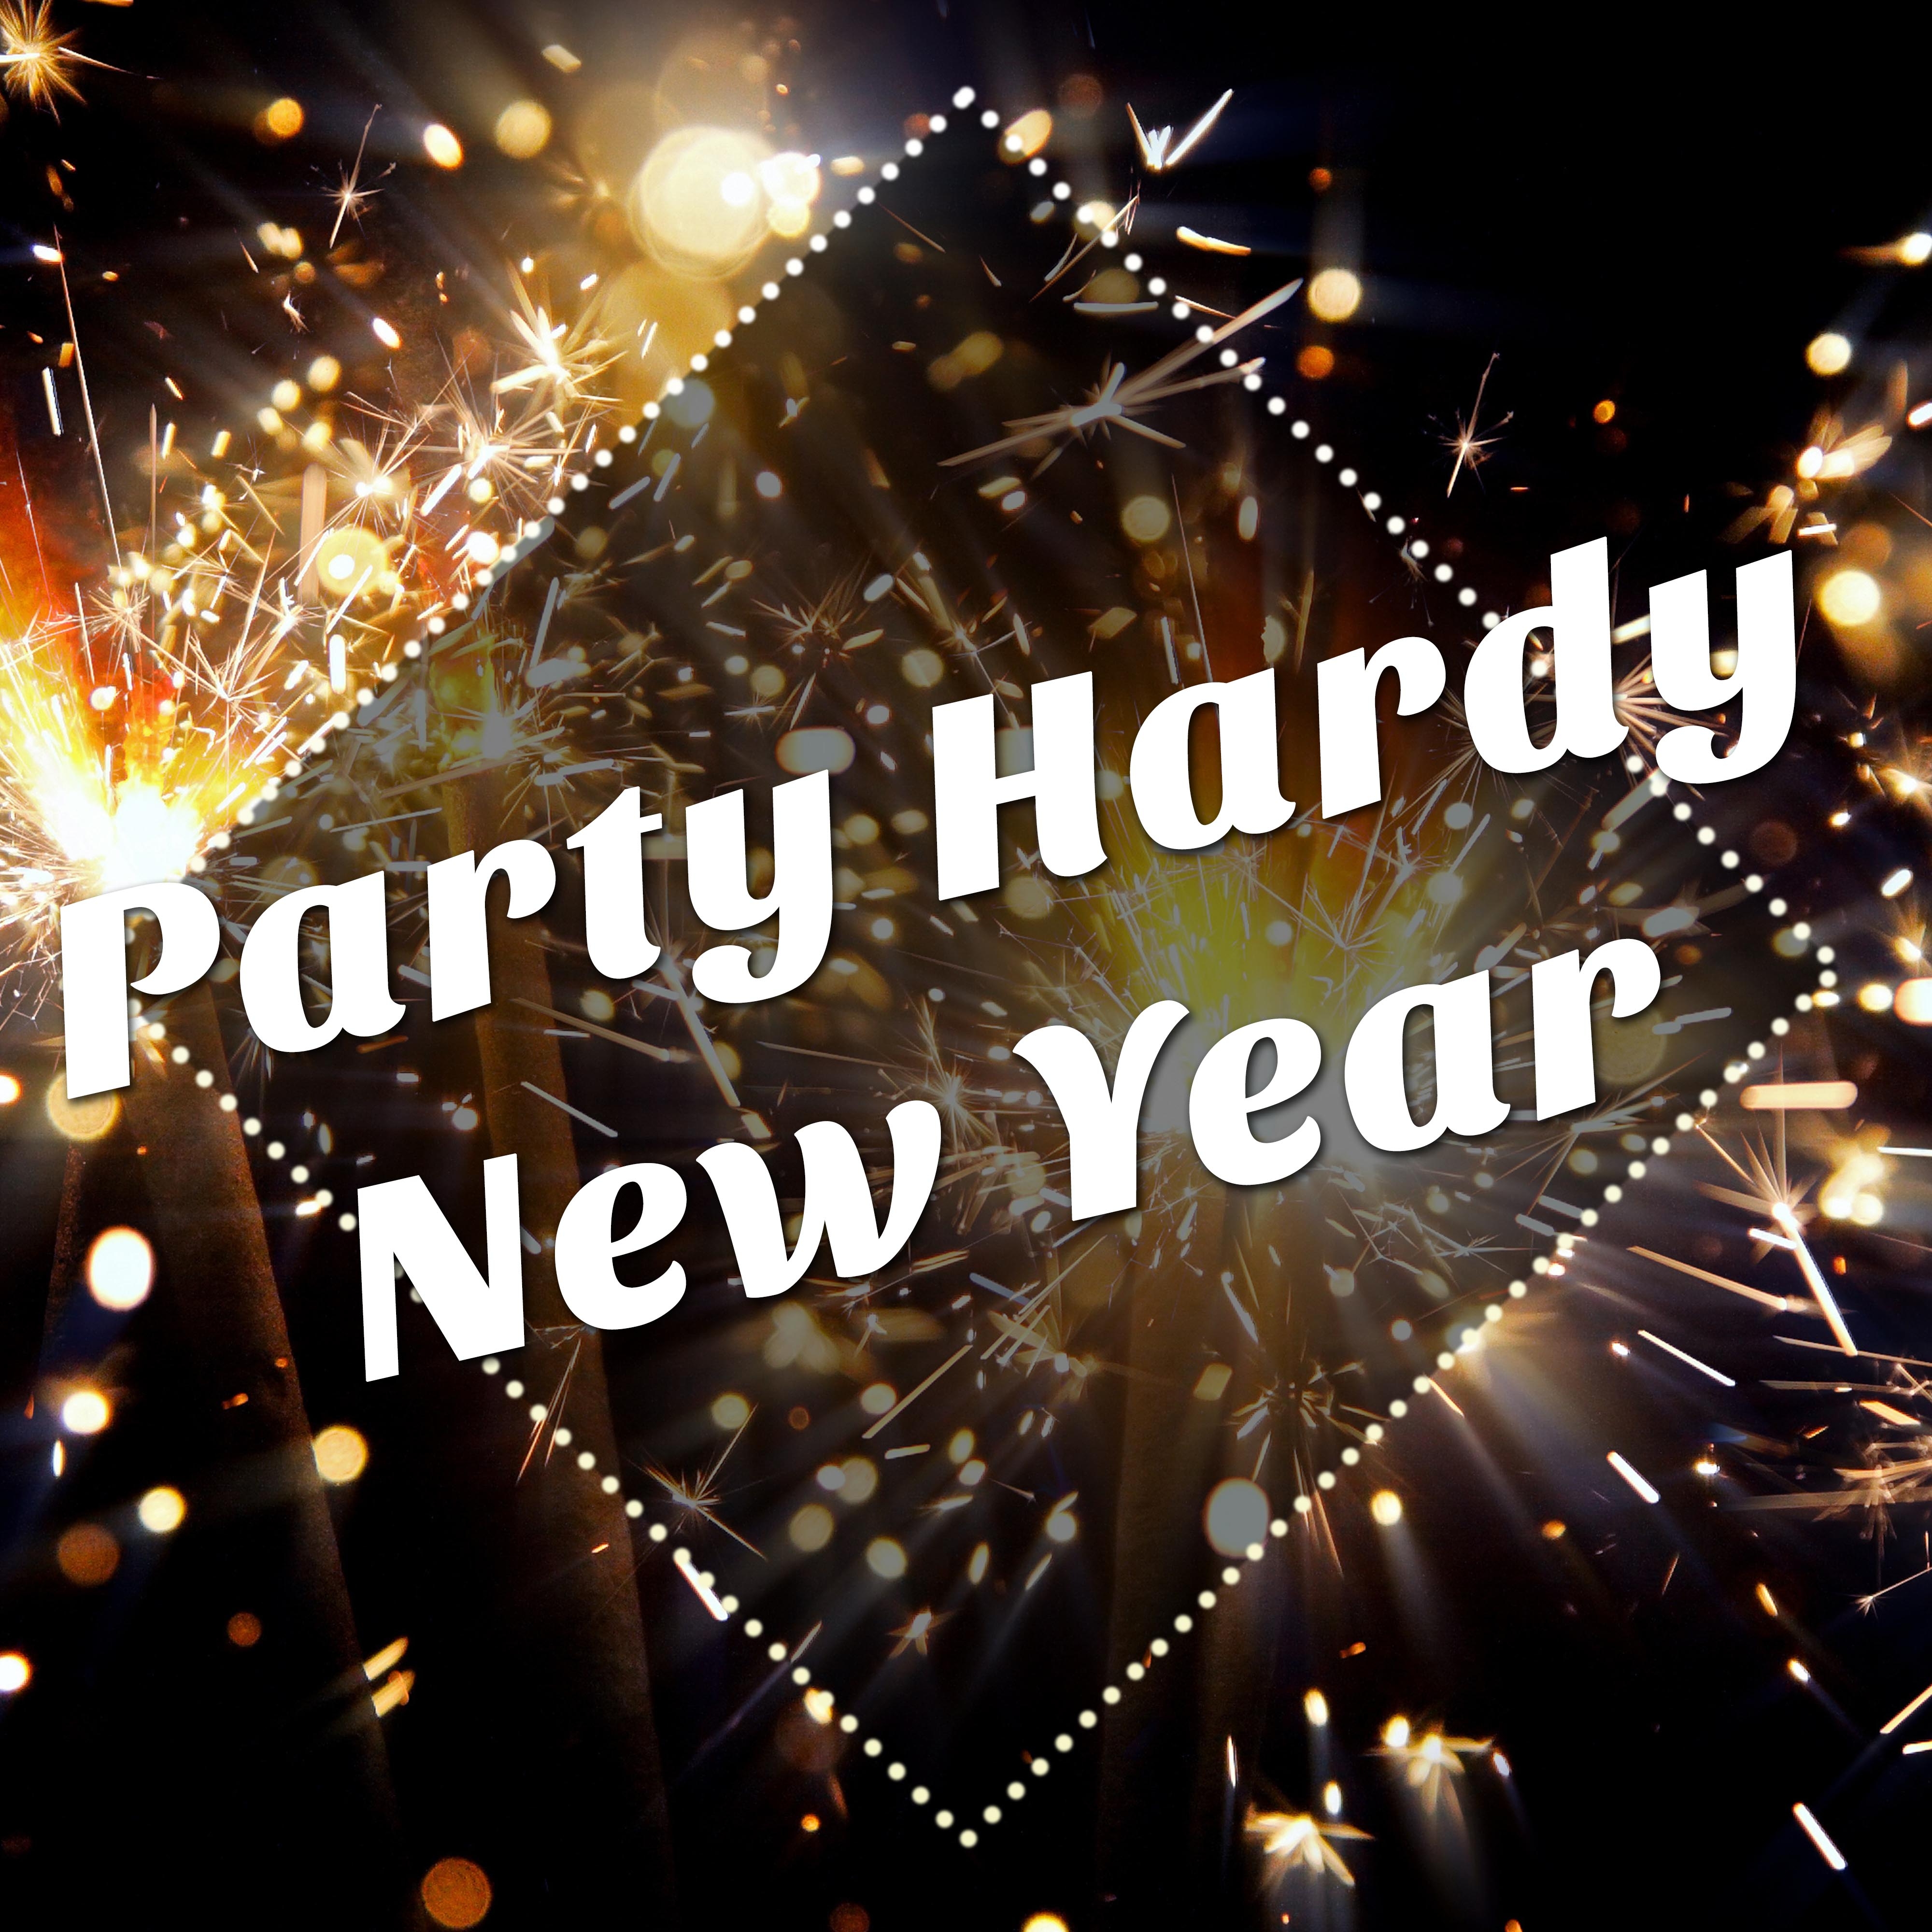 Party Hardy New Year  Turning Down the Lights and Party with these Tropical House Latin Songs for New Year' s Eve Celebrations